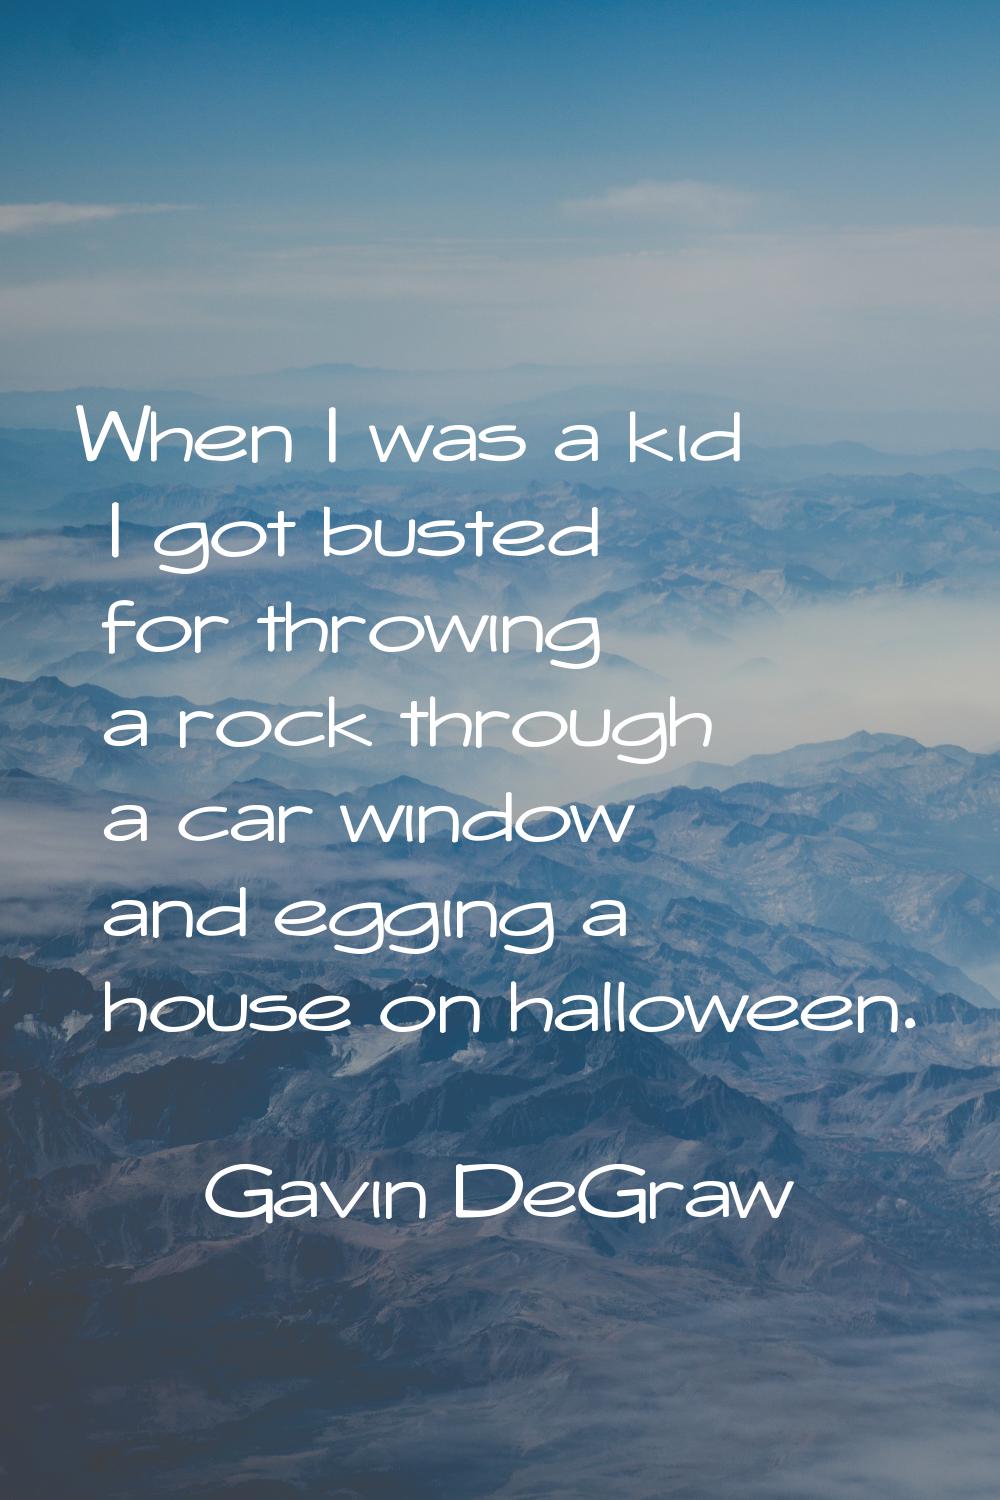 When I was a kid I got busted for throwing a rock through a car window and egging a house on hallow